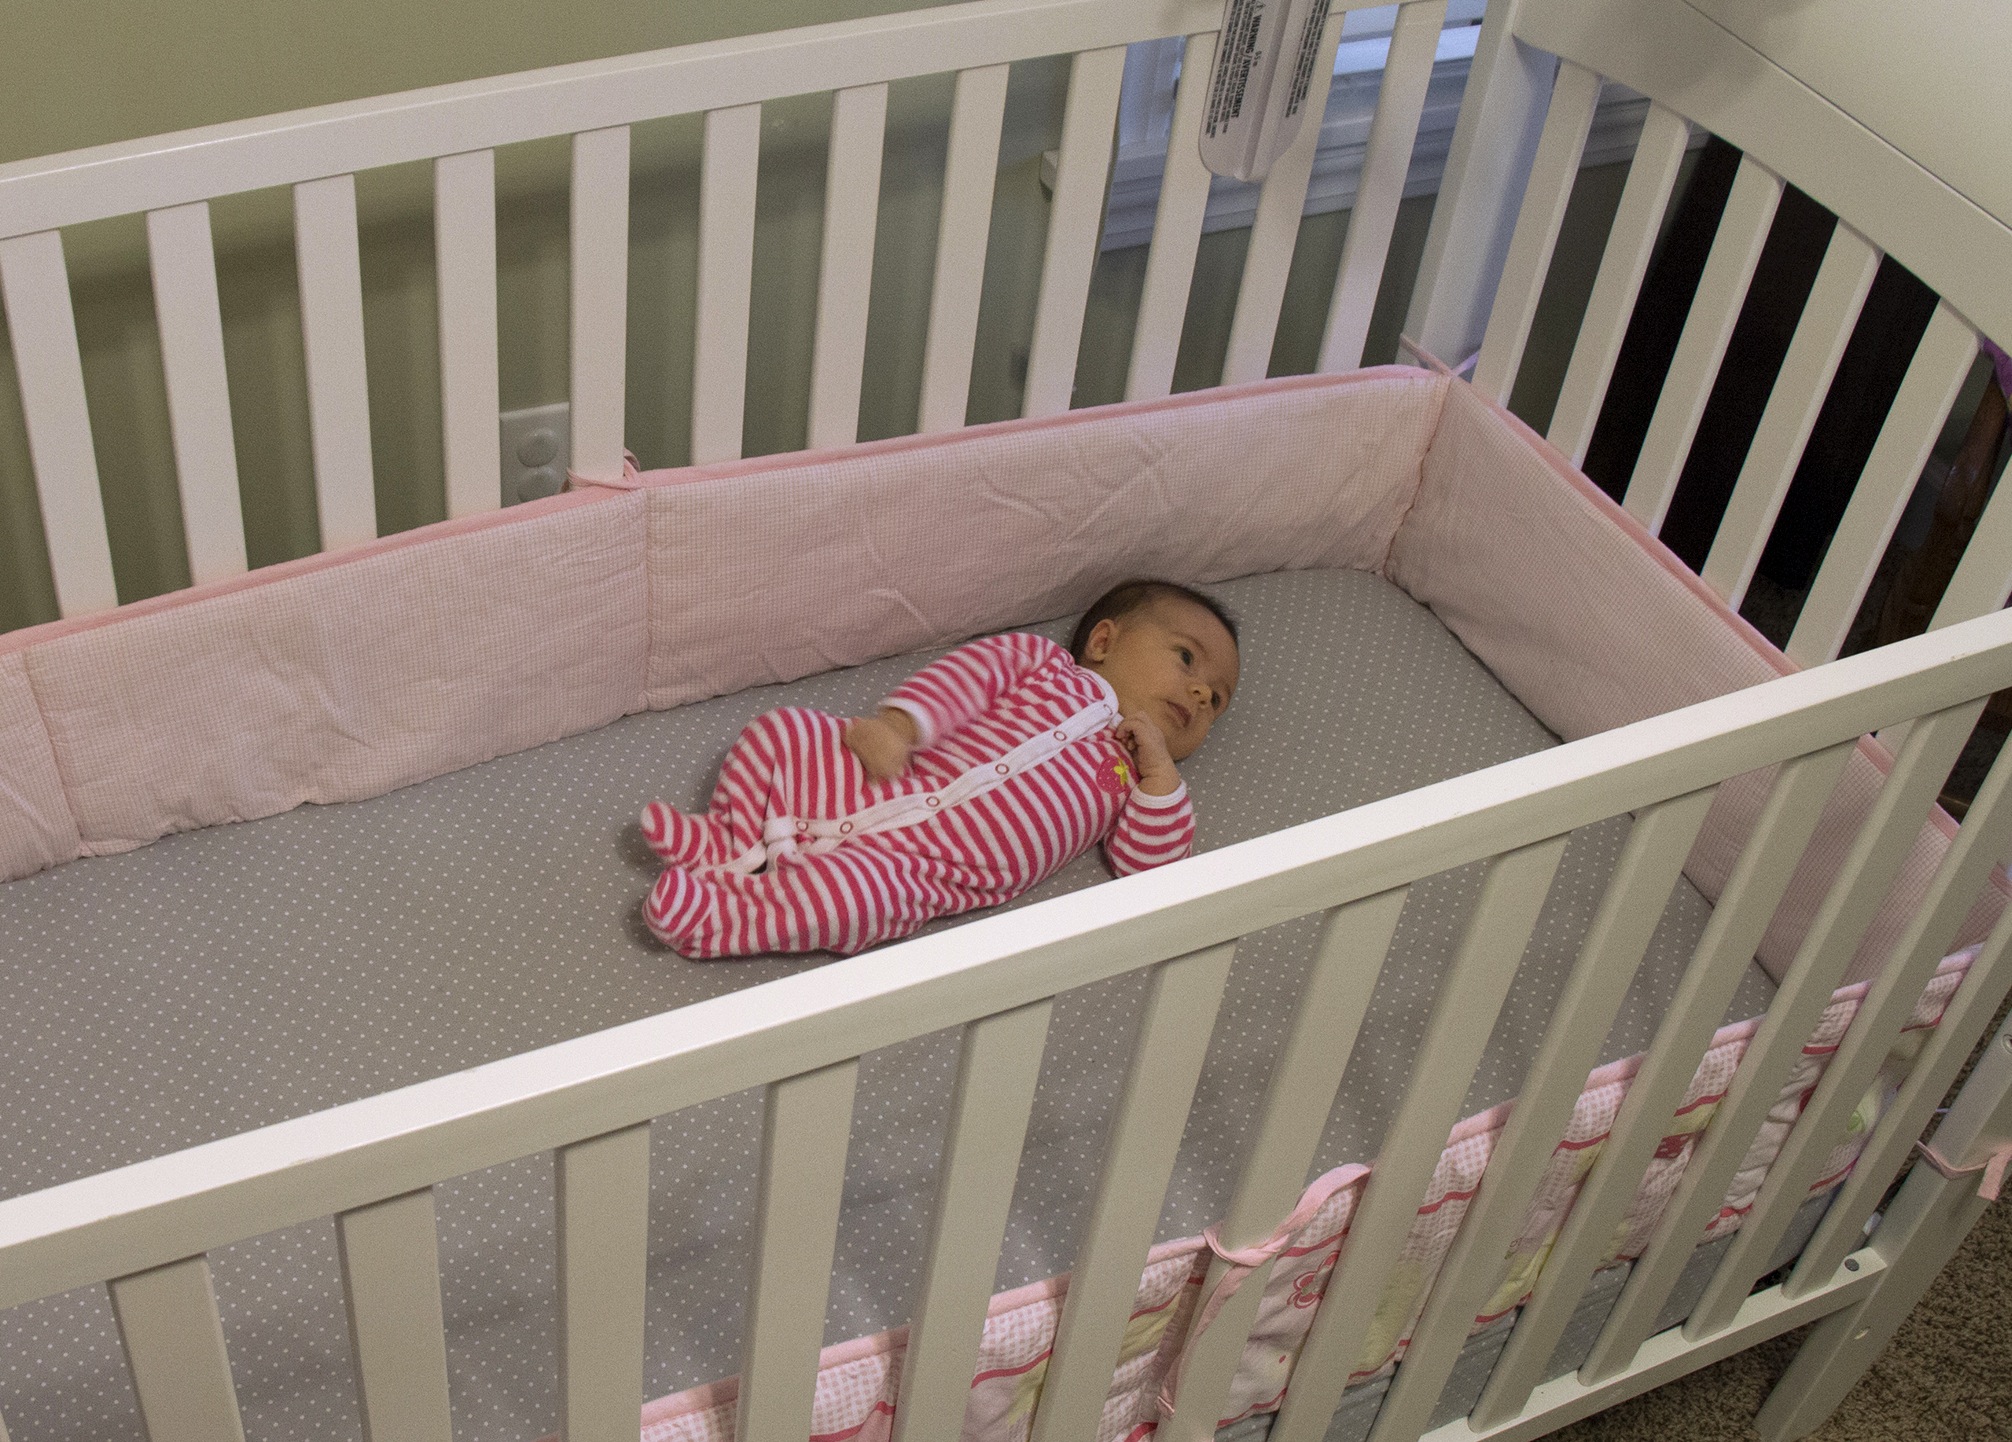 Infant deaths from crib bumpers on the rise - CBS News